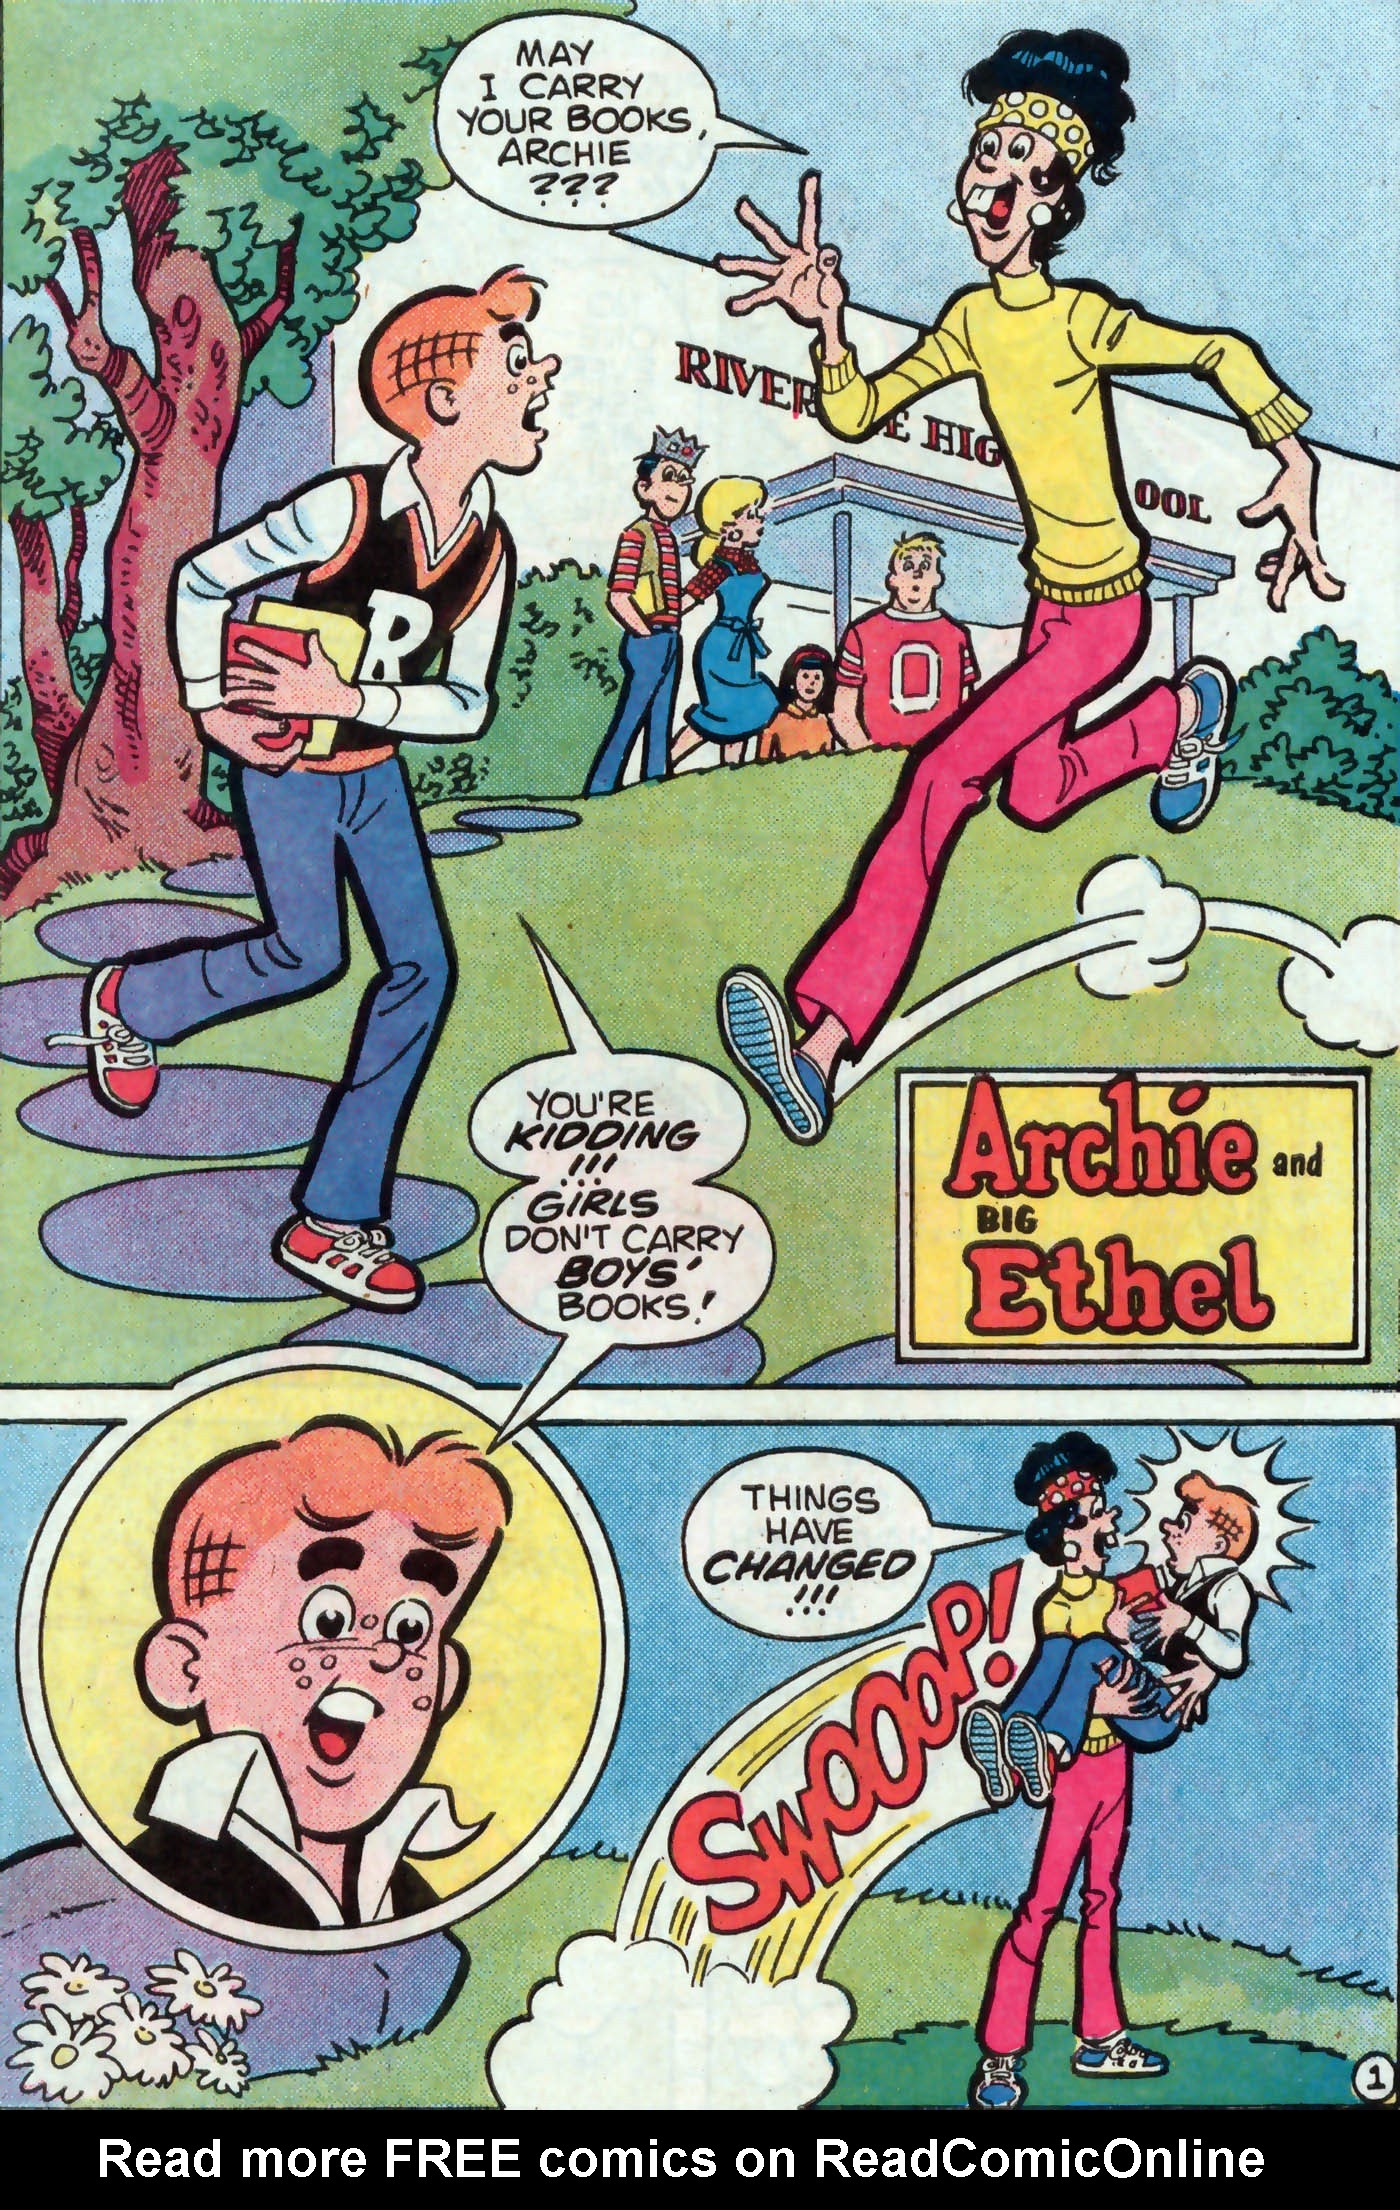 Read online Archie and Big Ethel comic -  Issue # Full - 3